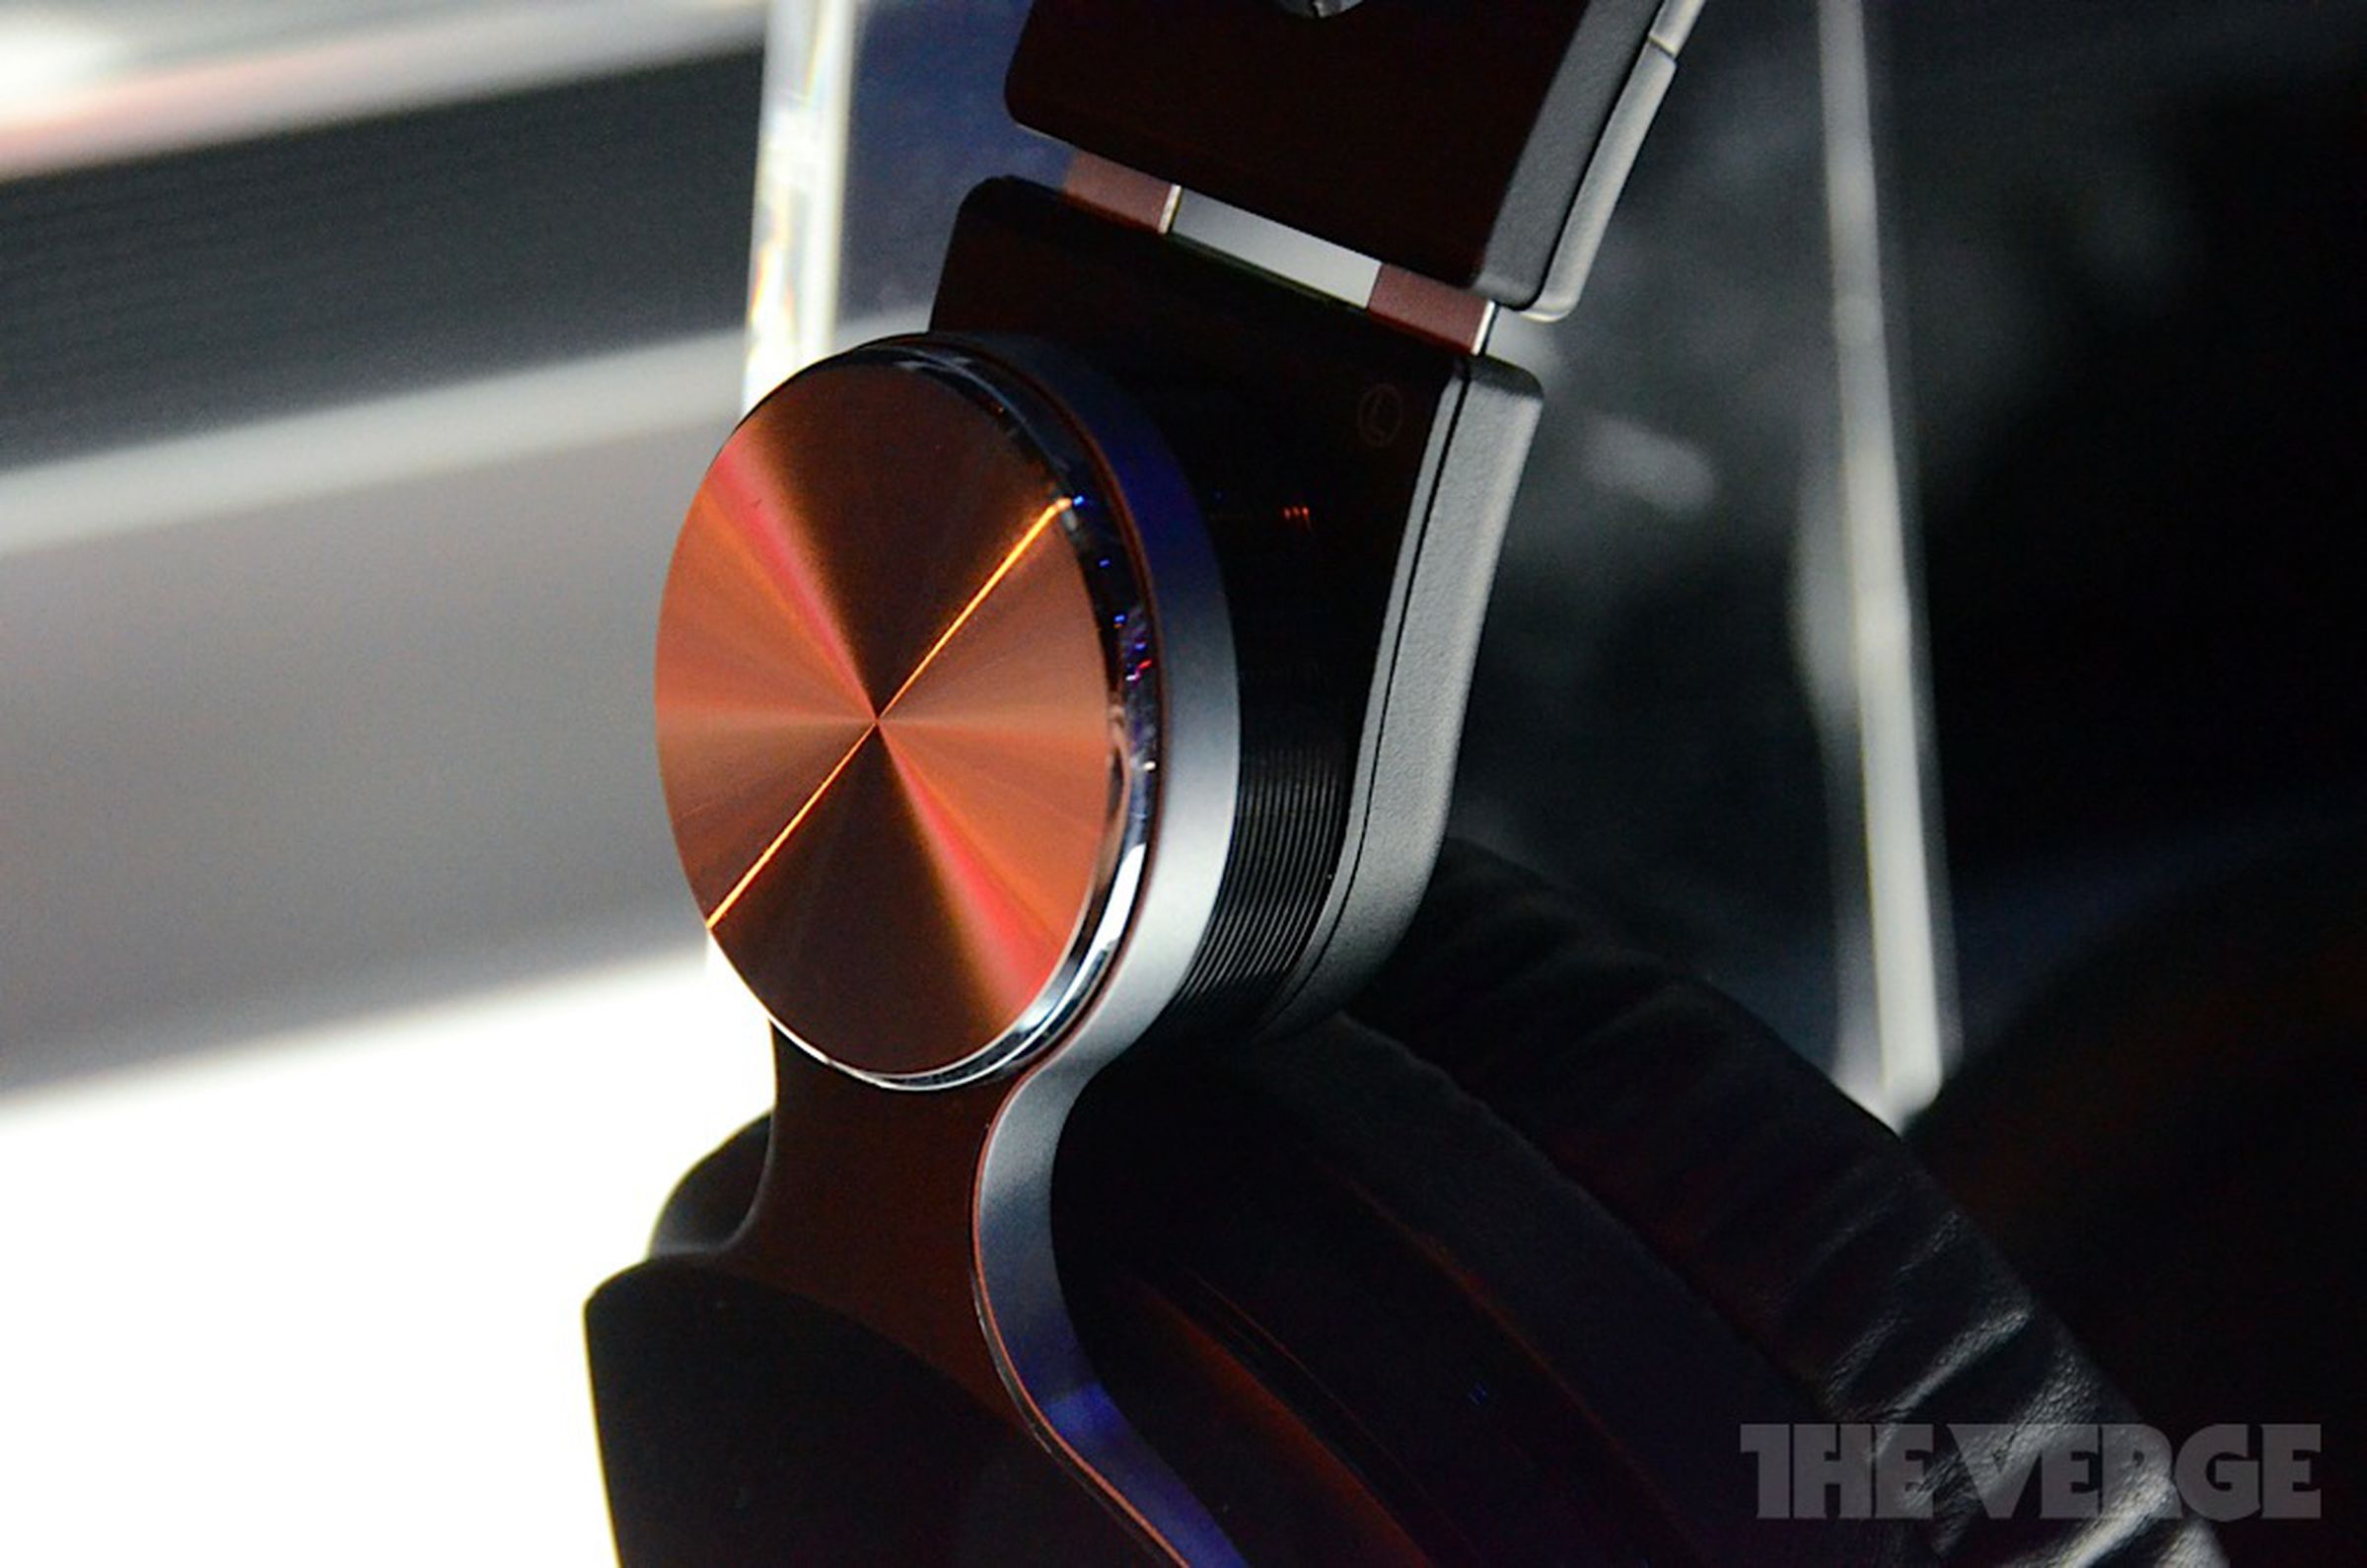 Sony Pulse Wireless Stereo Headset Elite Edition hands-on impressions